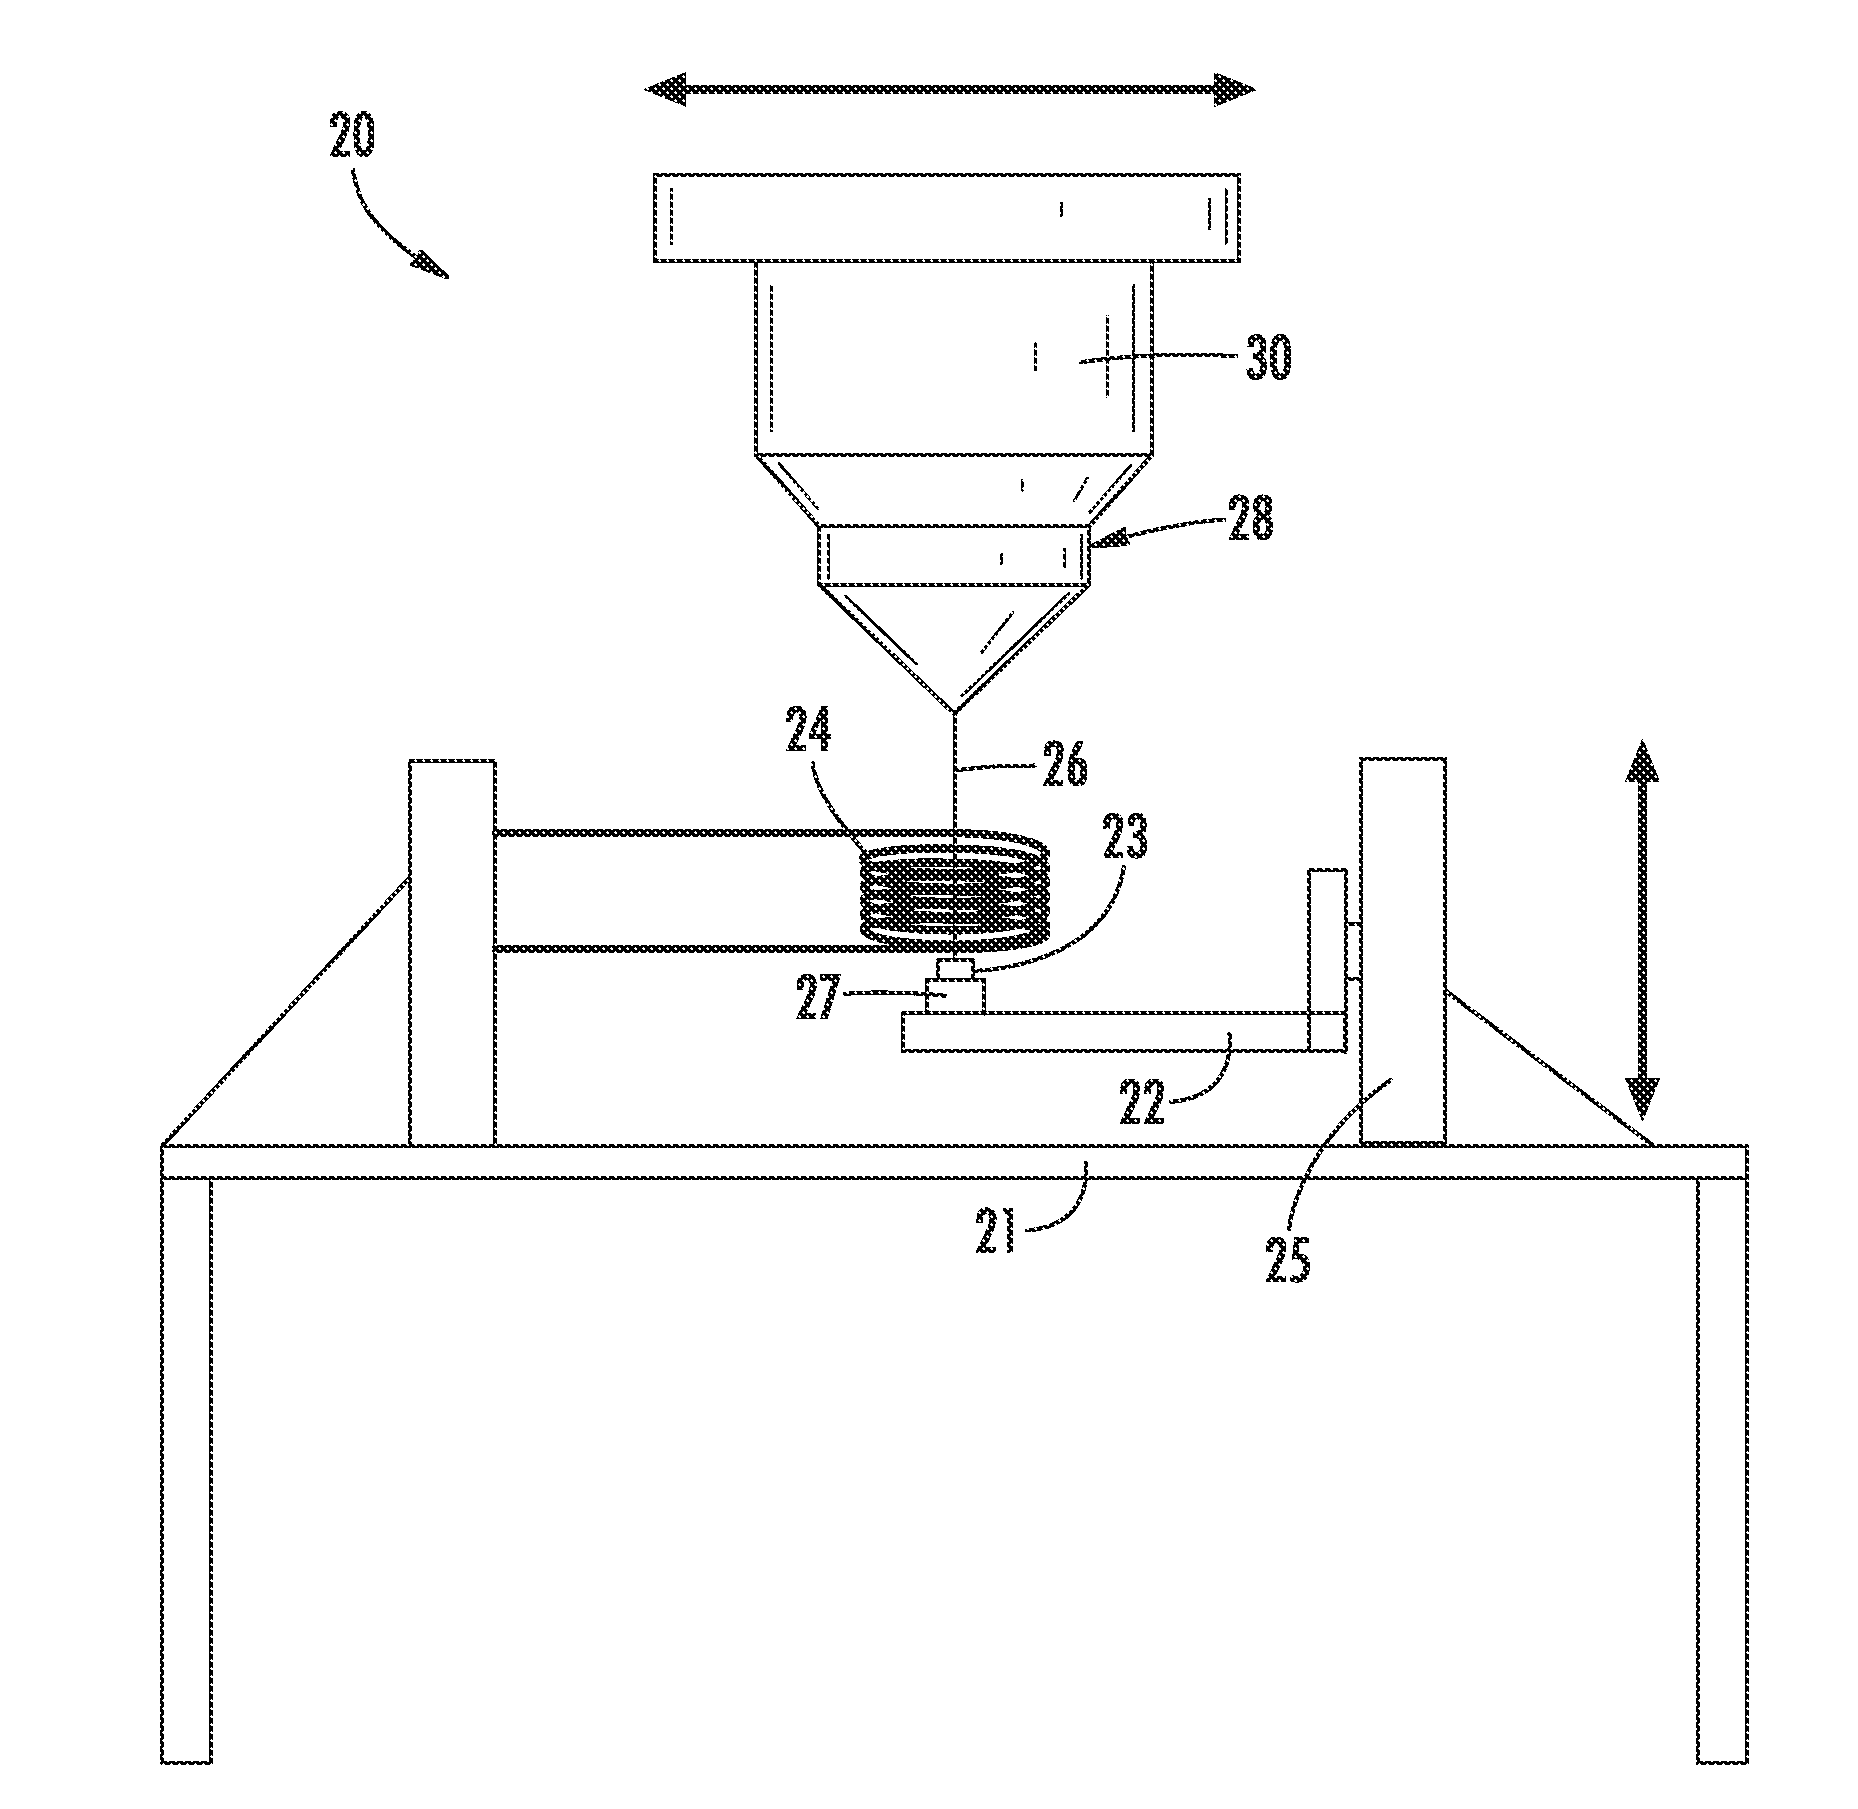 Apparatus and method for direct writing of single crystal super alloys and metals